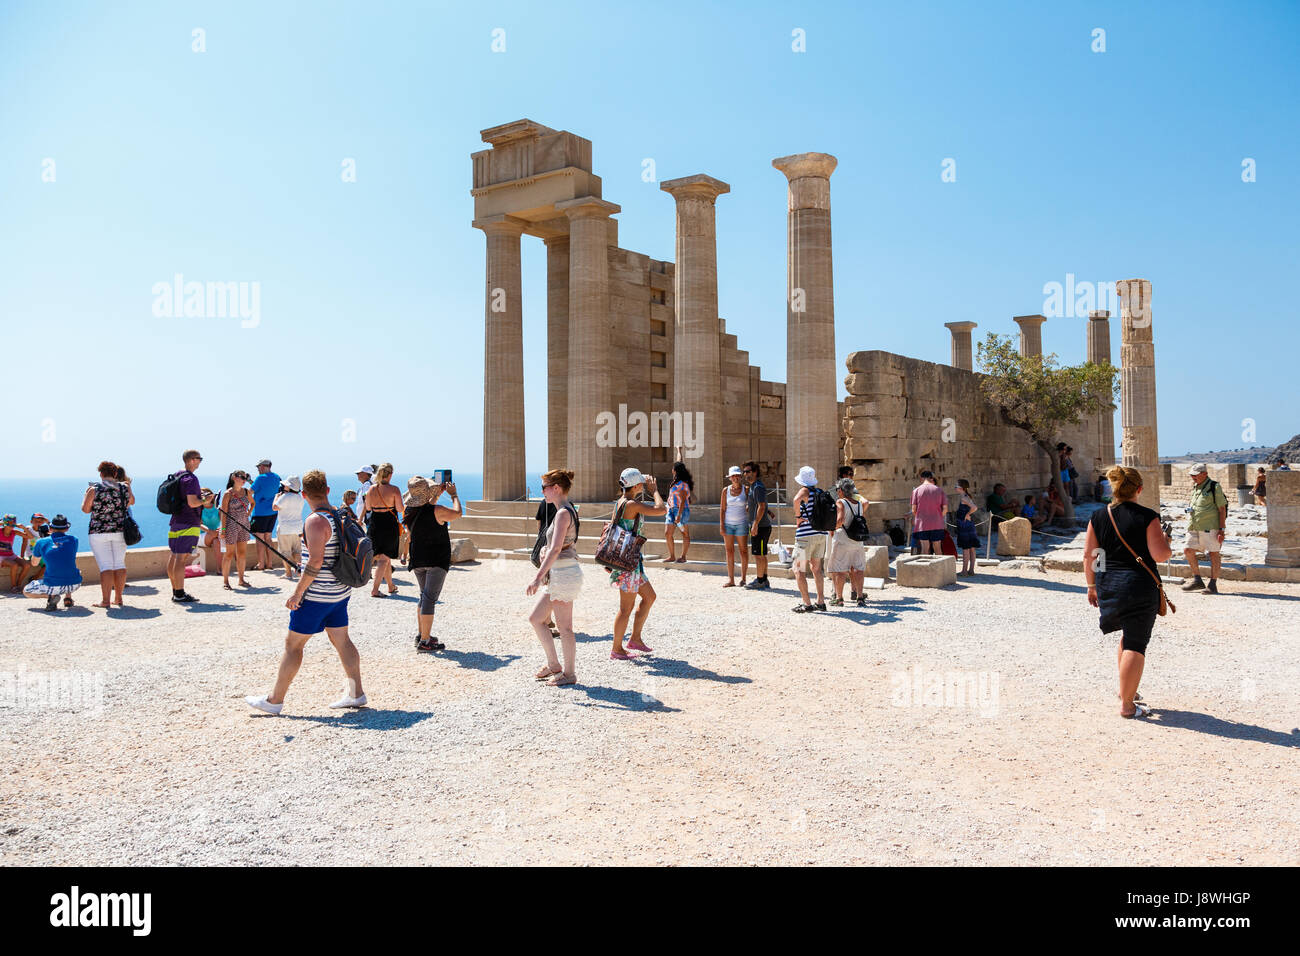 LINDOS, RHODES ISLAND, GREECE - September 3, 2015:  People visiting the ruins of a Doric temple of Athena Lindia on the Acropolis of Lindos, Rhodes, G Stock Photo